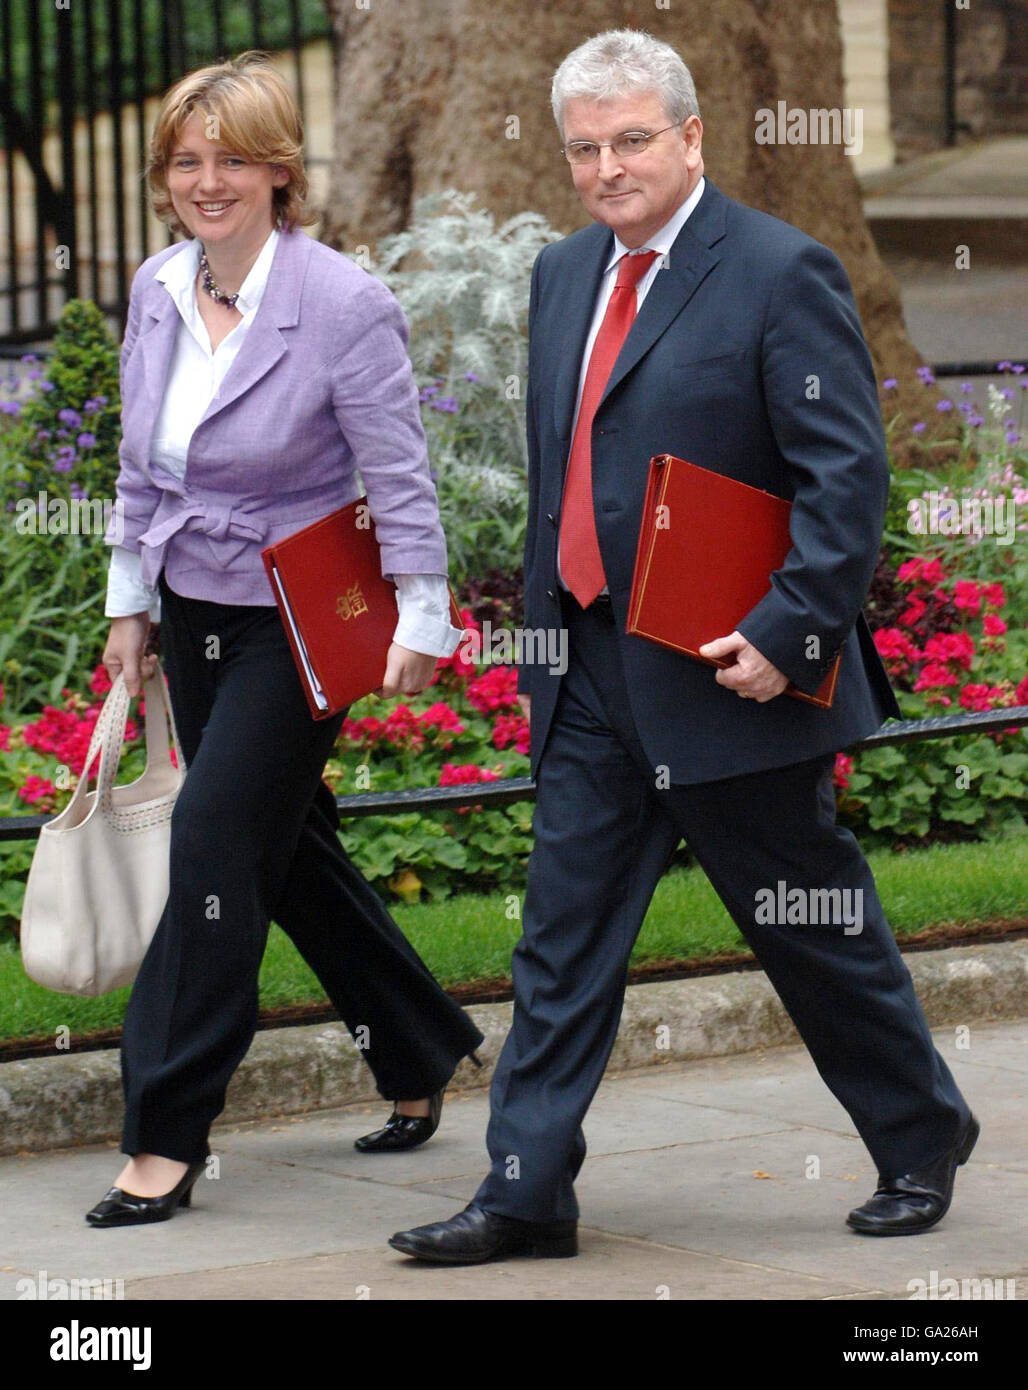 Transport Secretary Ruth Kelly and Defence Secretary Des Browne in Downing Street, London, arriving for their first cabinet meeting with Prime Minister Gordon Brown. Stock Photo